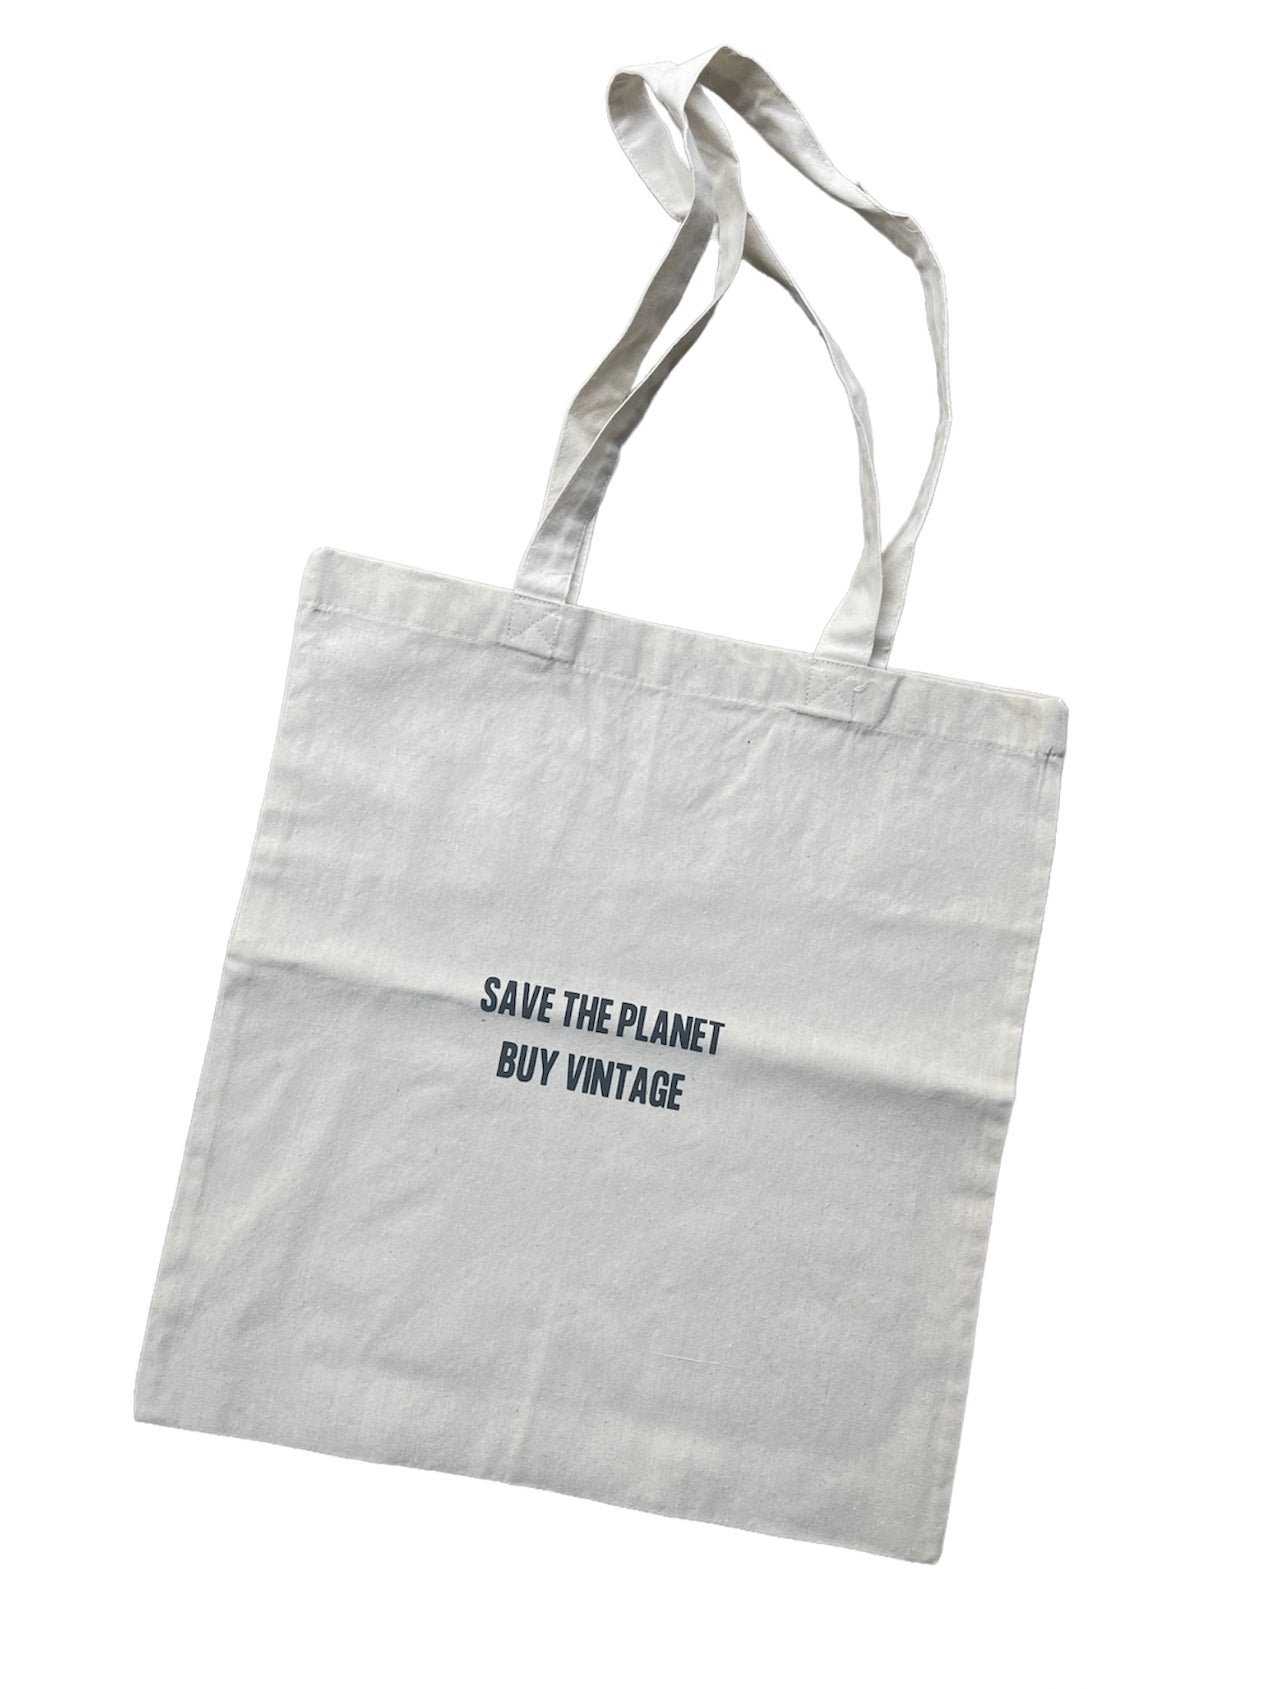 “Save The Planet” Tote